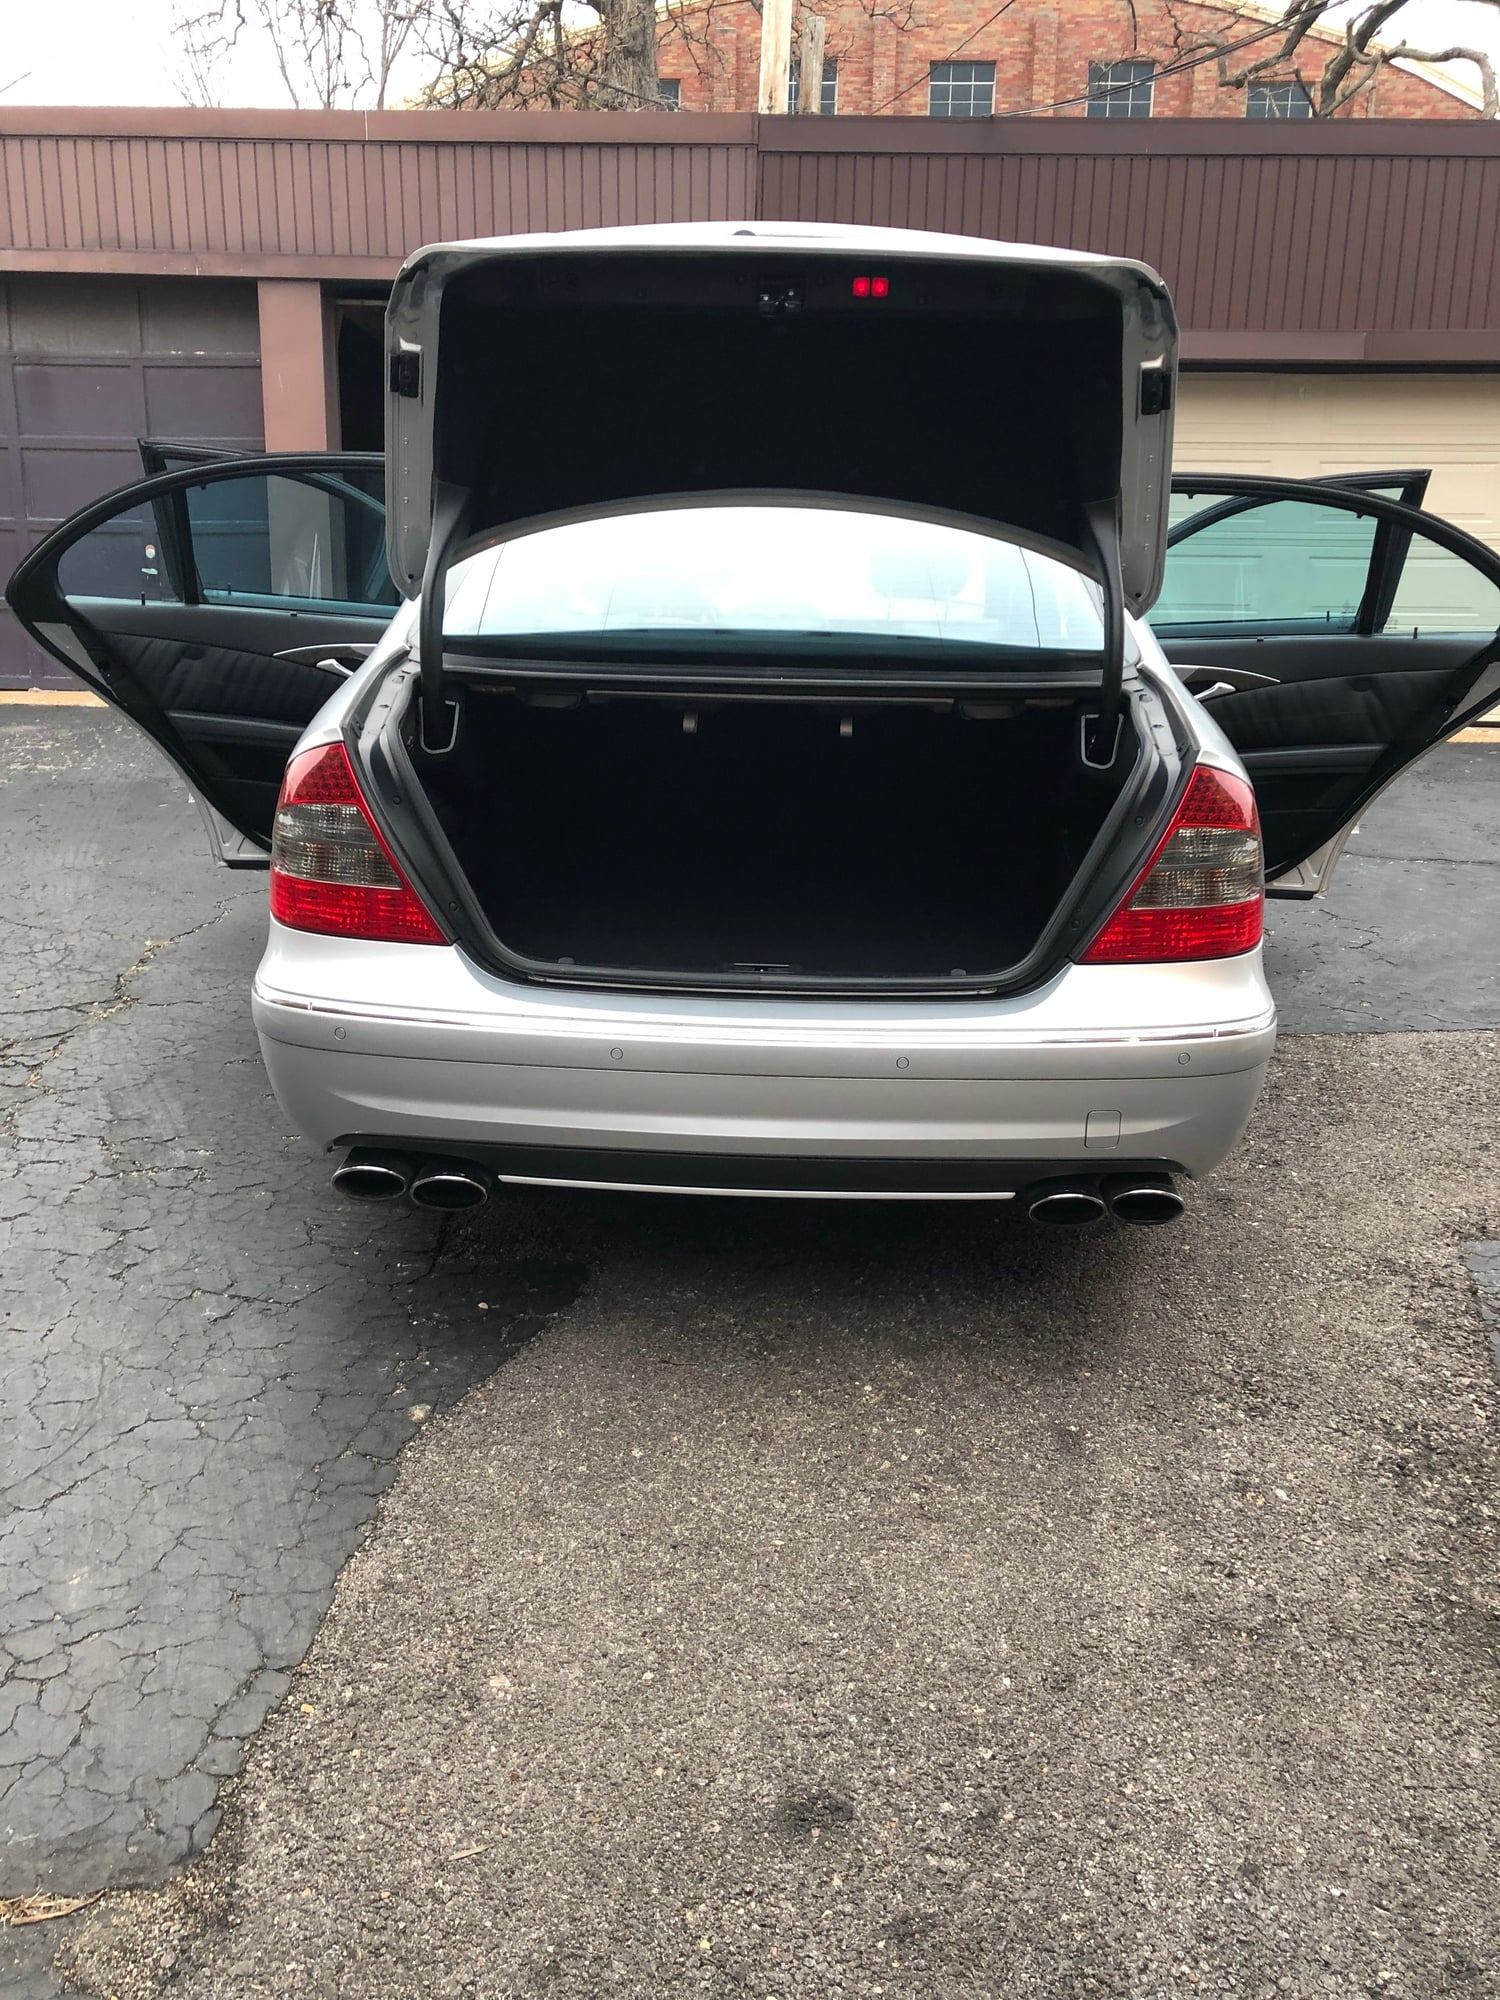 2007 Mercedes-Benz E63 AMG - Well maintained E63 AMG for sale, with warranty - Used - VIN Wdbuf77x27b042940 - 60,200 Miles - 8 cyl - 2WD - Automatic - Sedan - Silver - St. Louis, MO 63105, United States